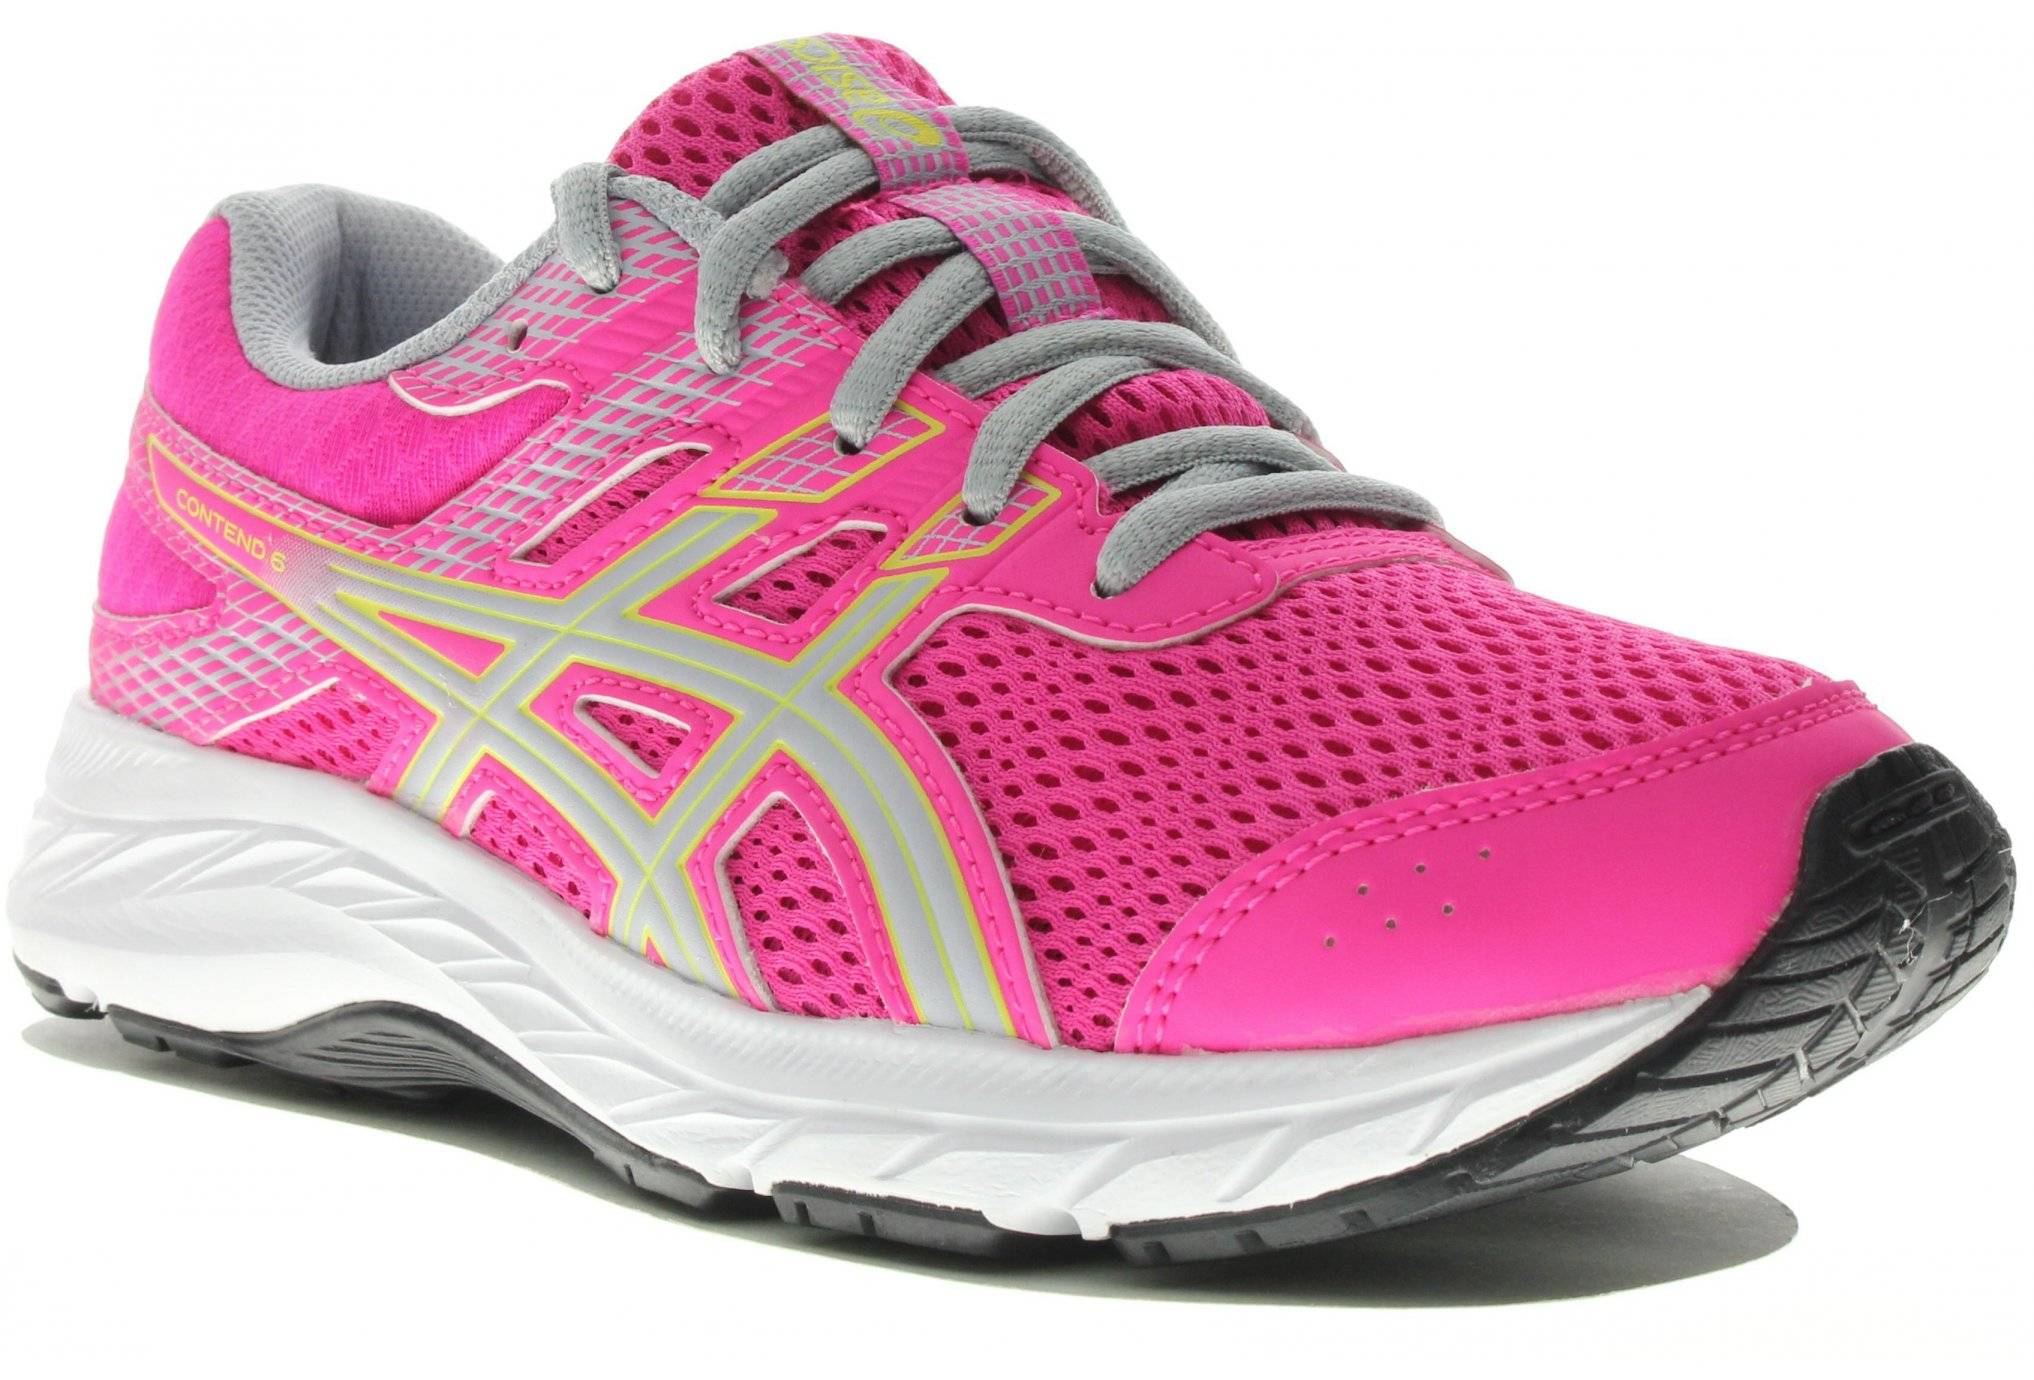 Asics Contend 6 Fille 